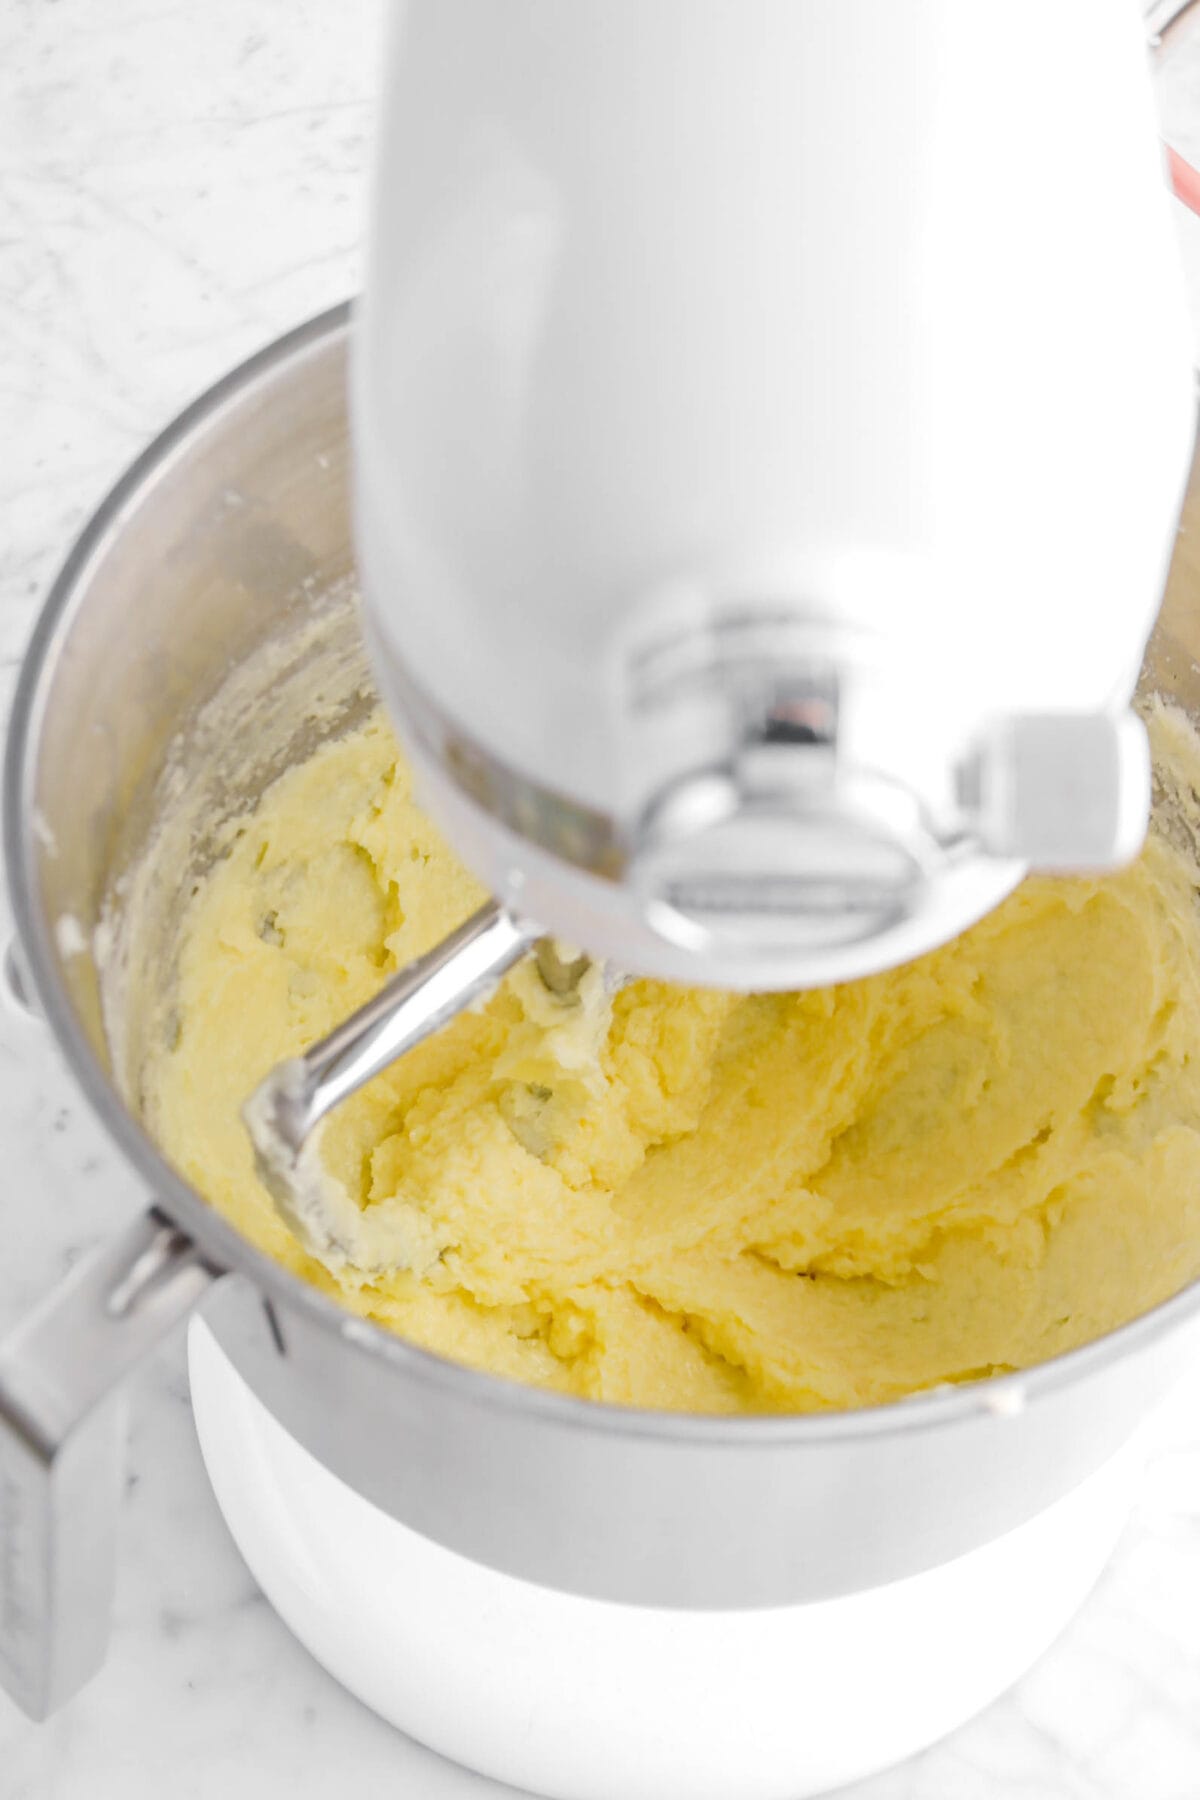 eggs stirred into butter and sugar mixture